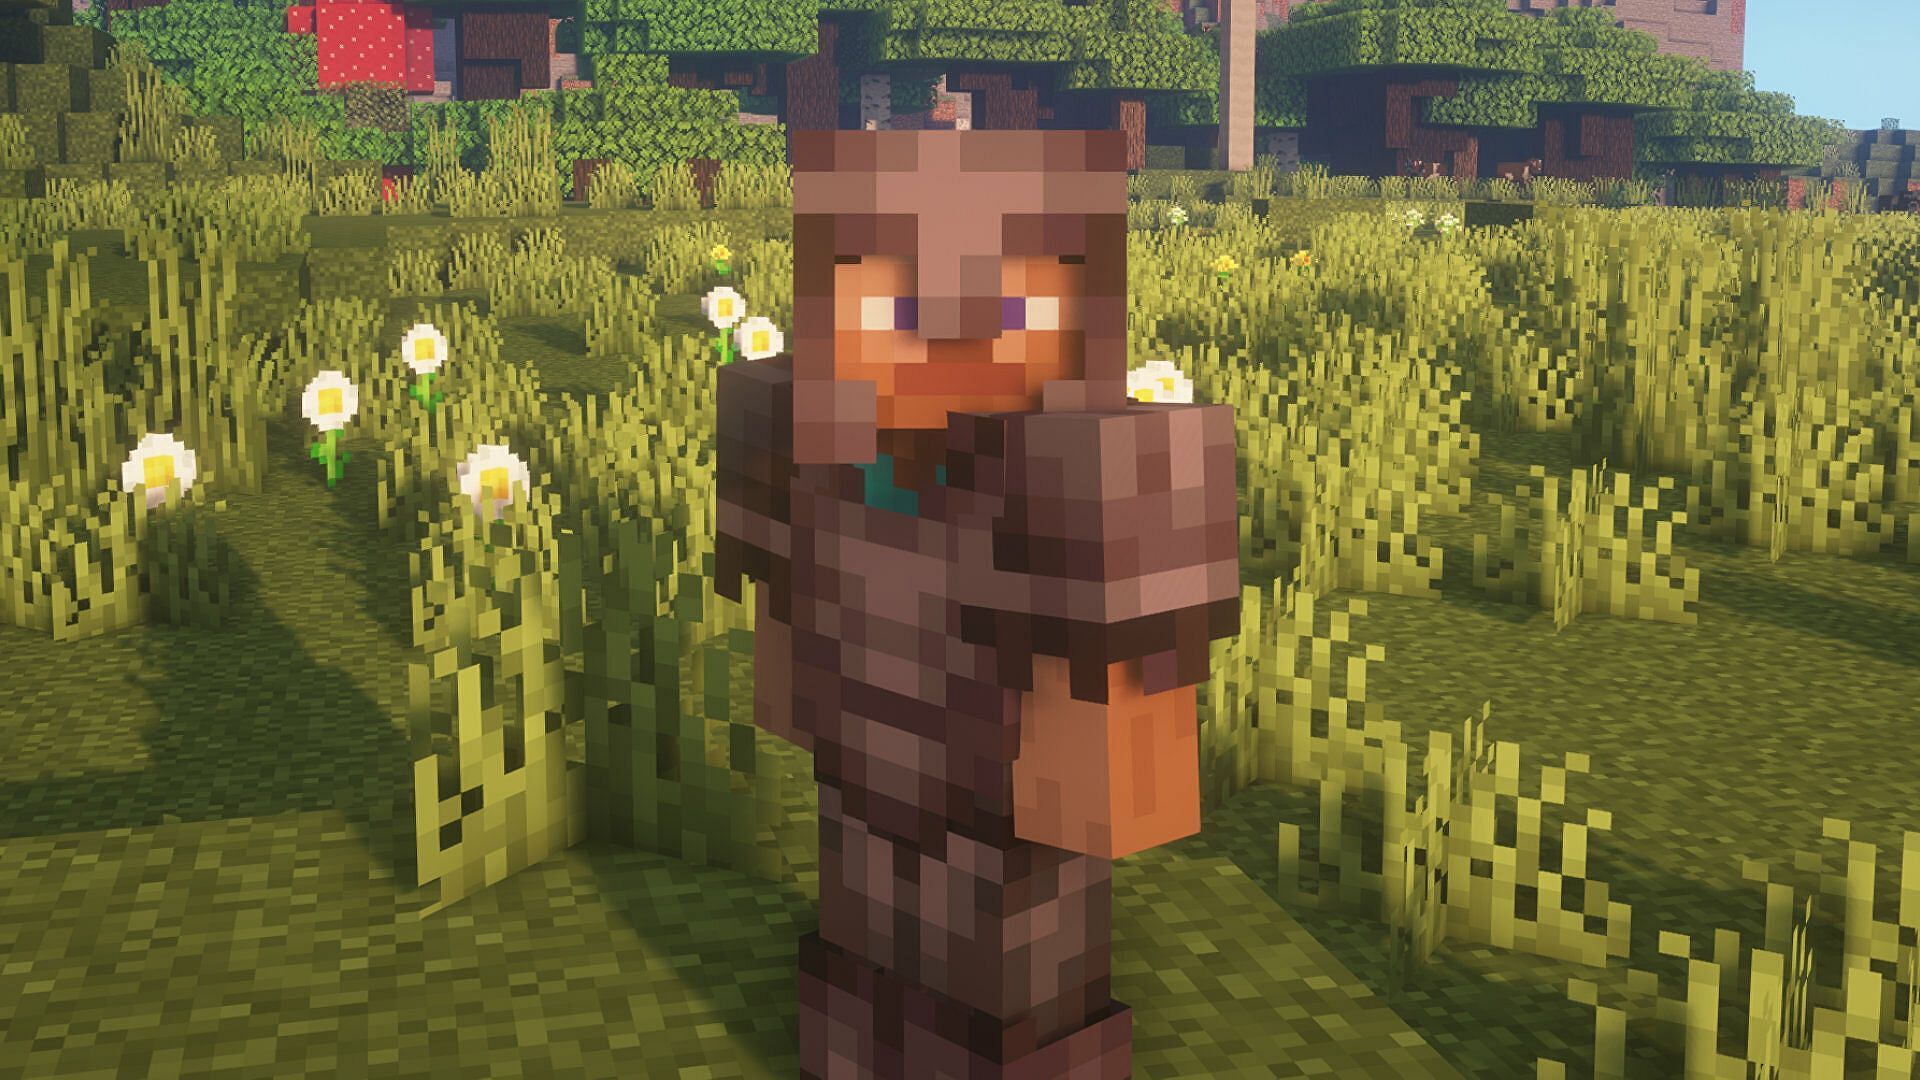 Crafting netherite armor may be tougher in Minecraft after update 1.20 (Image via Mojang)